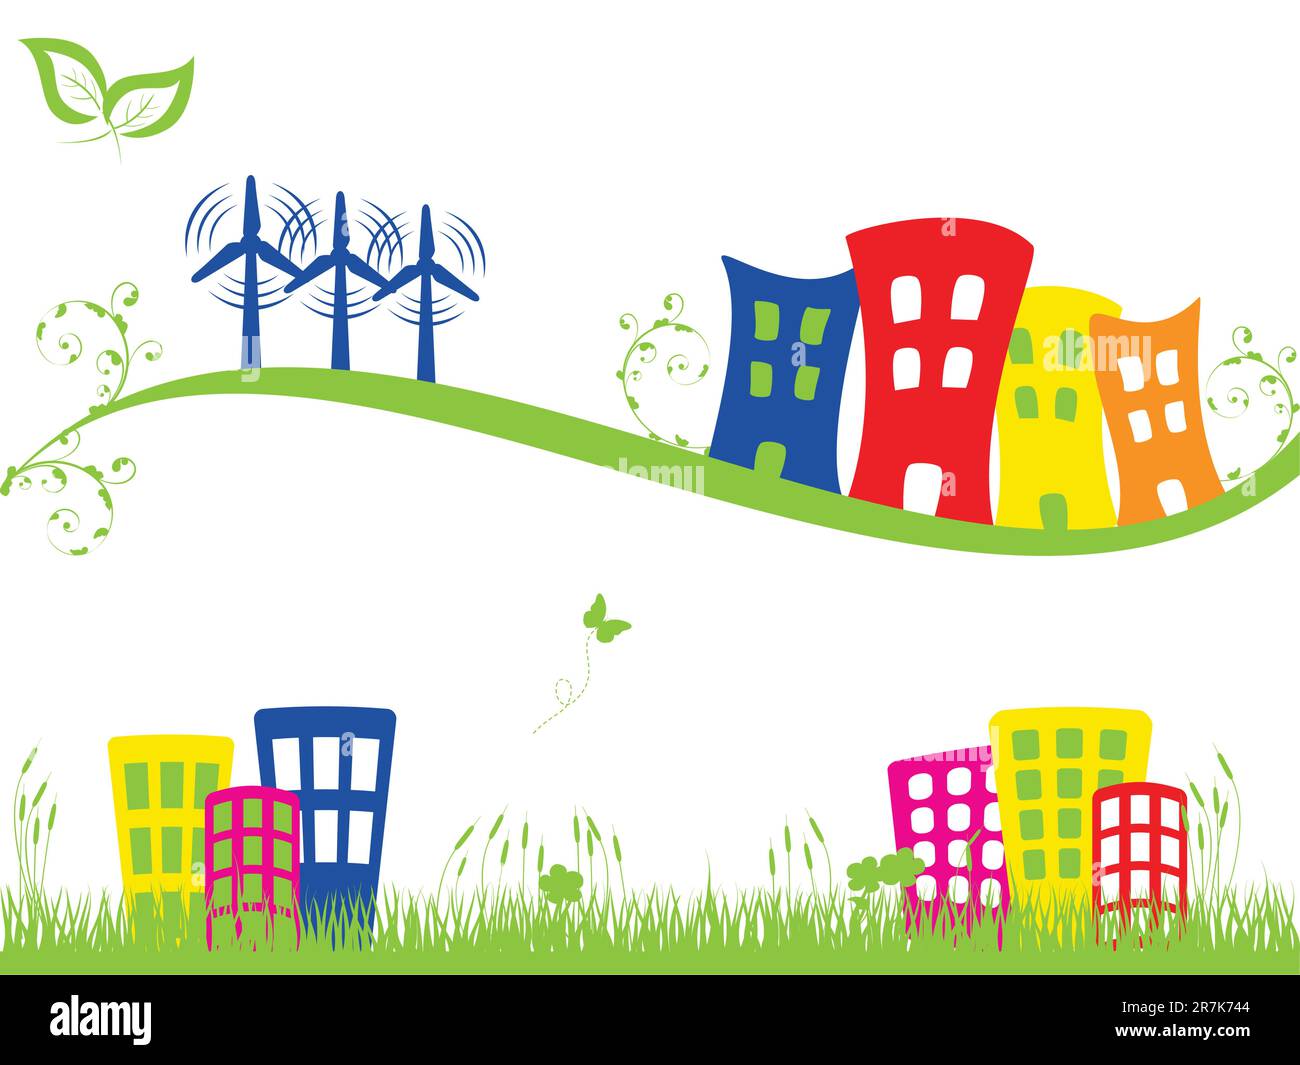 Green city banners with wind turbines Stock Vector